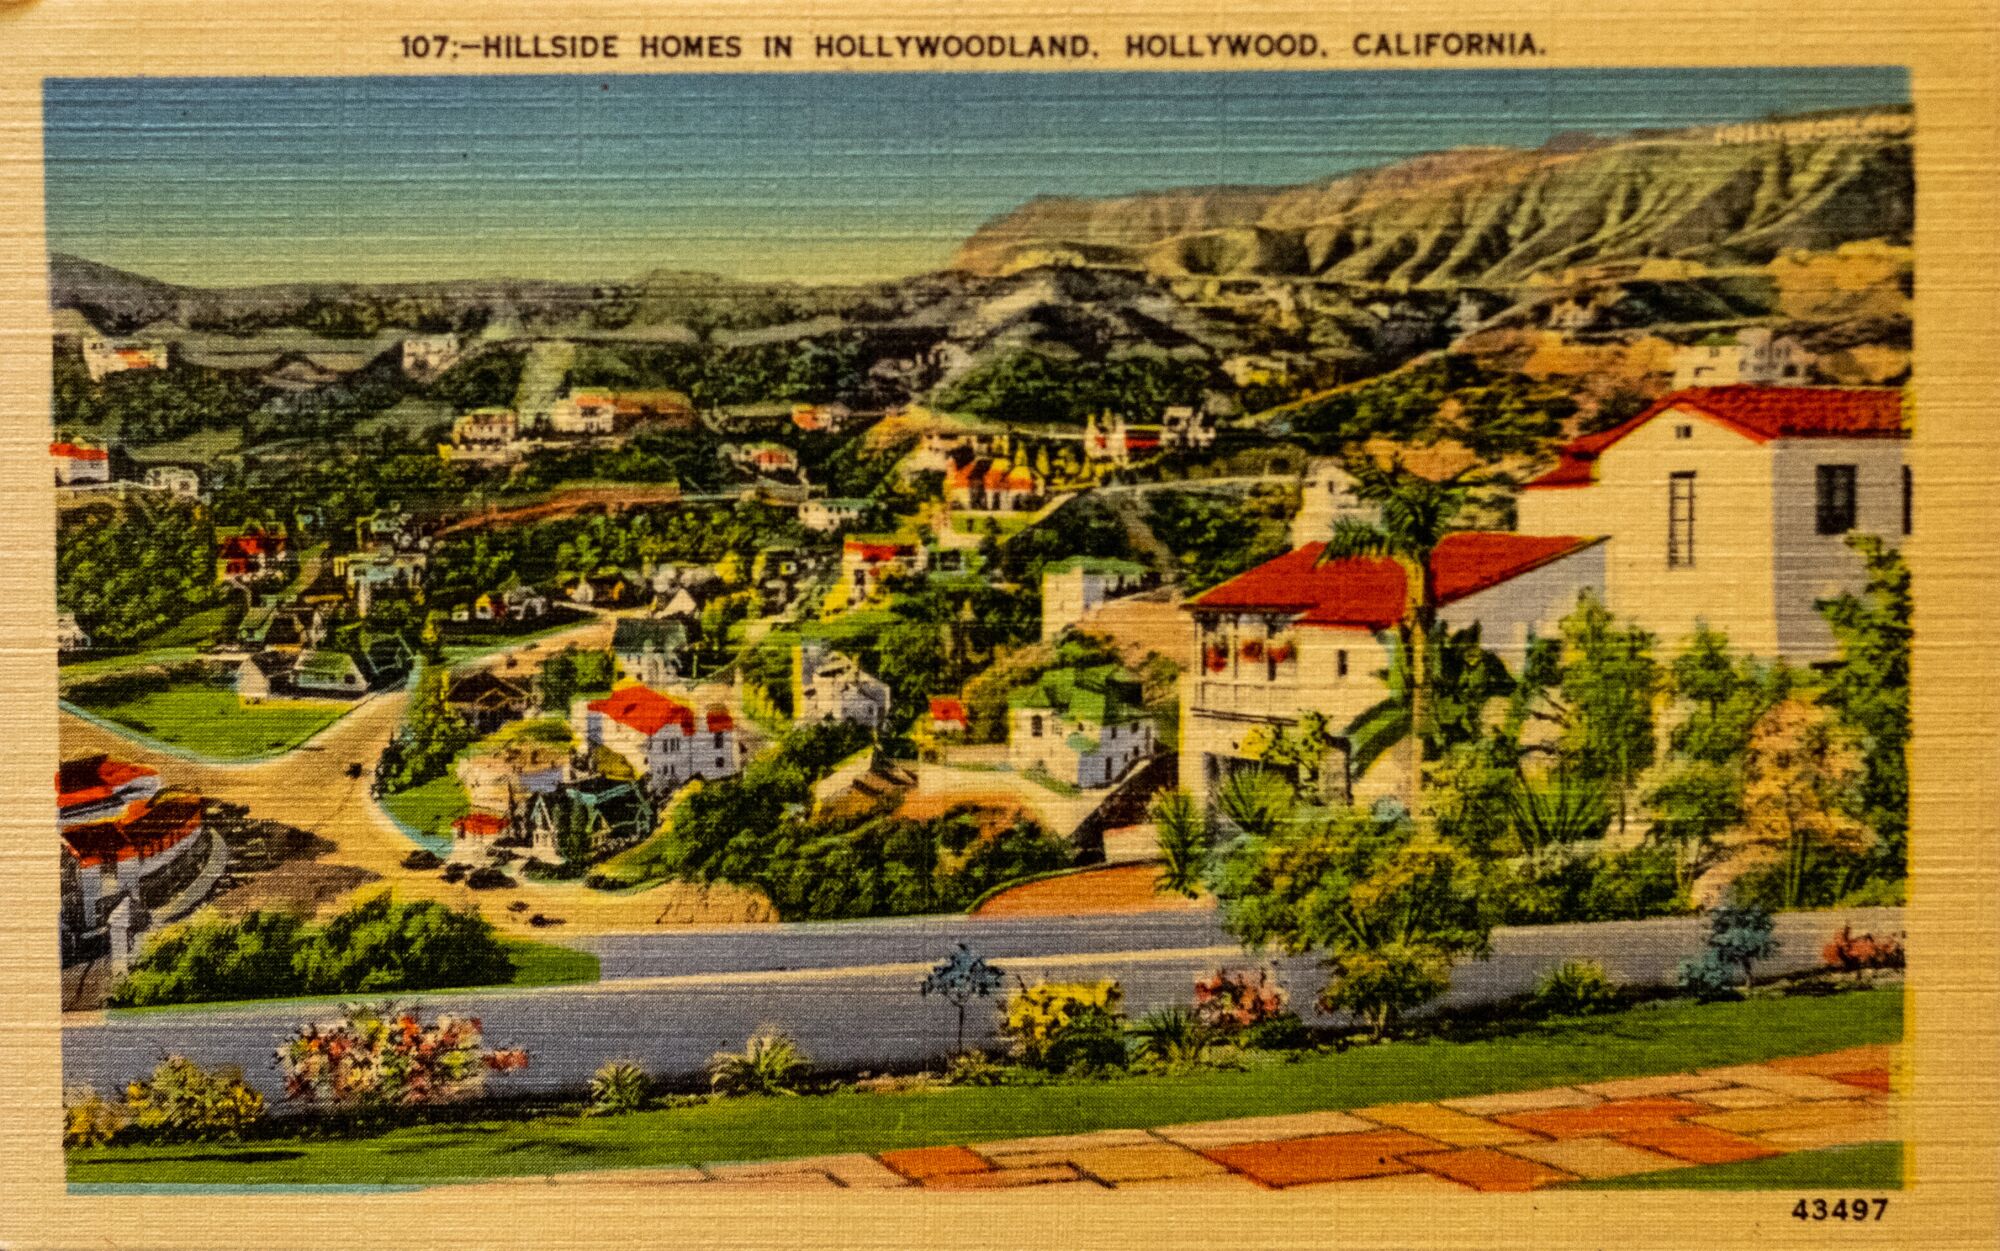 A historical postcard of the Hollywoodland residential district.